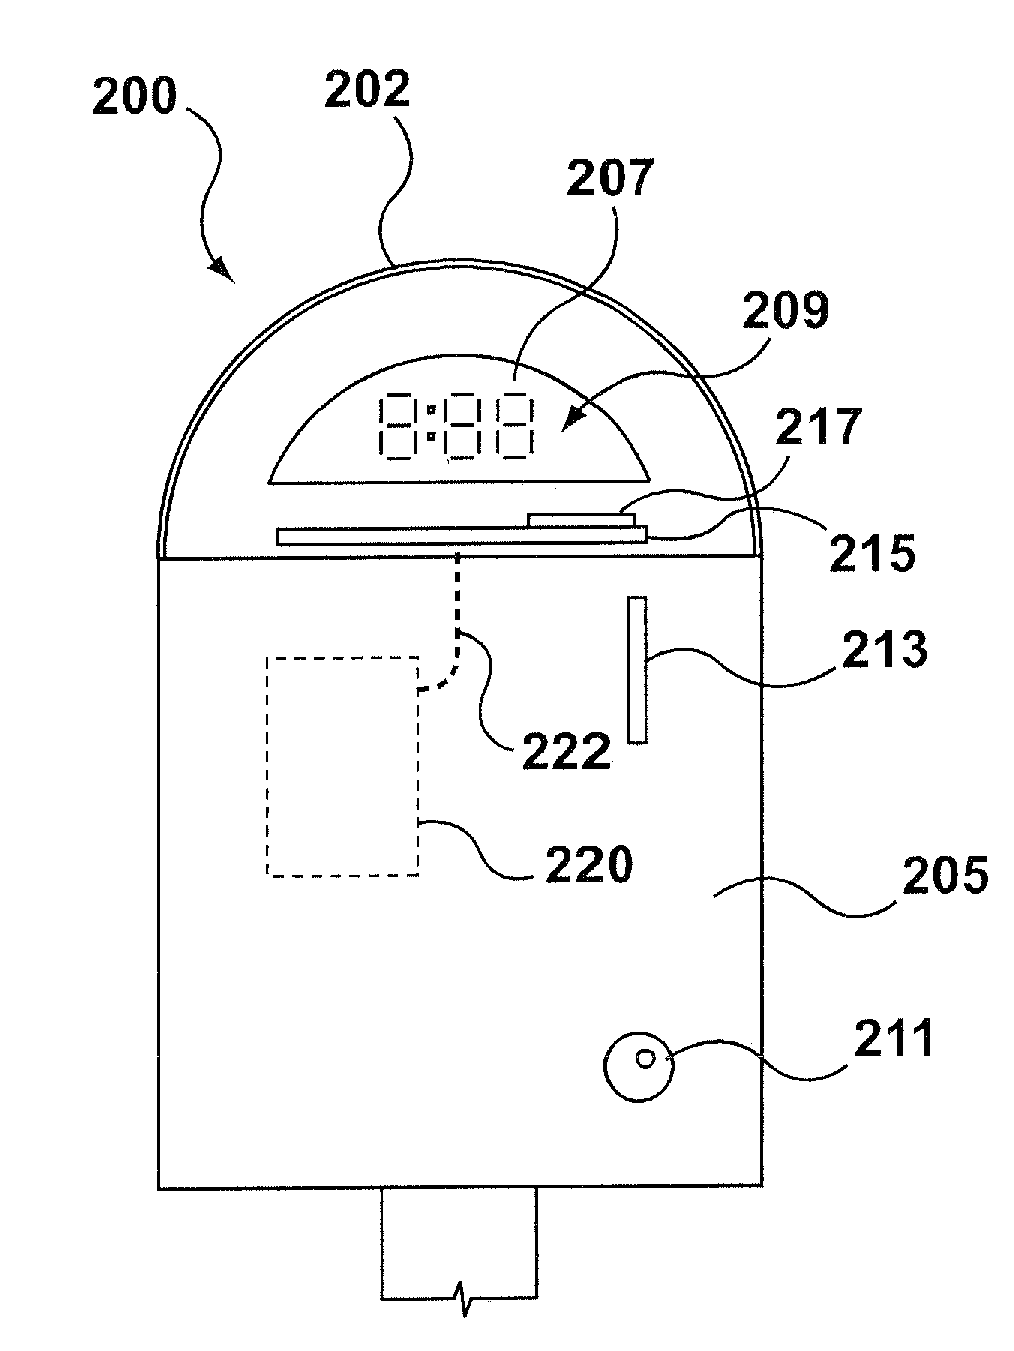 Data collection system for electronic parking meters